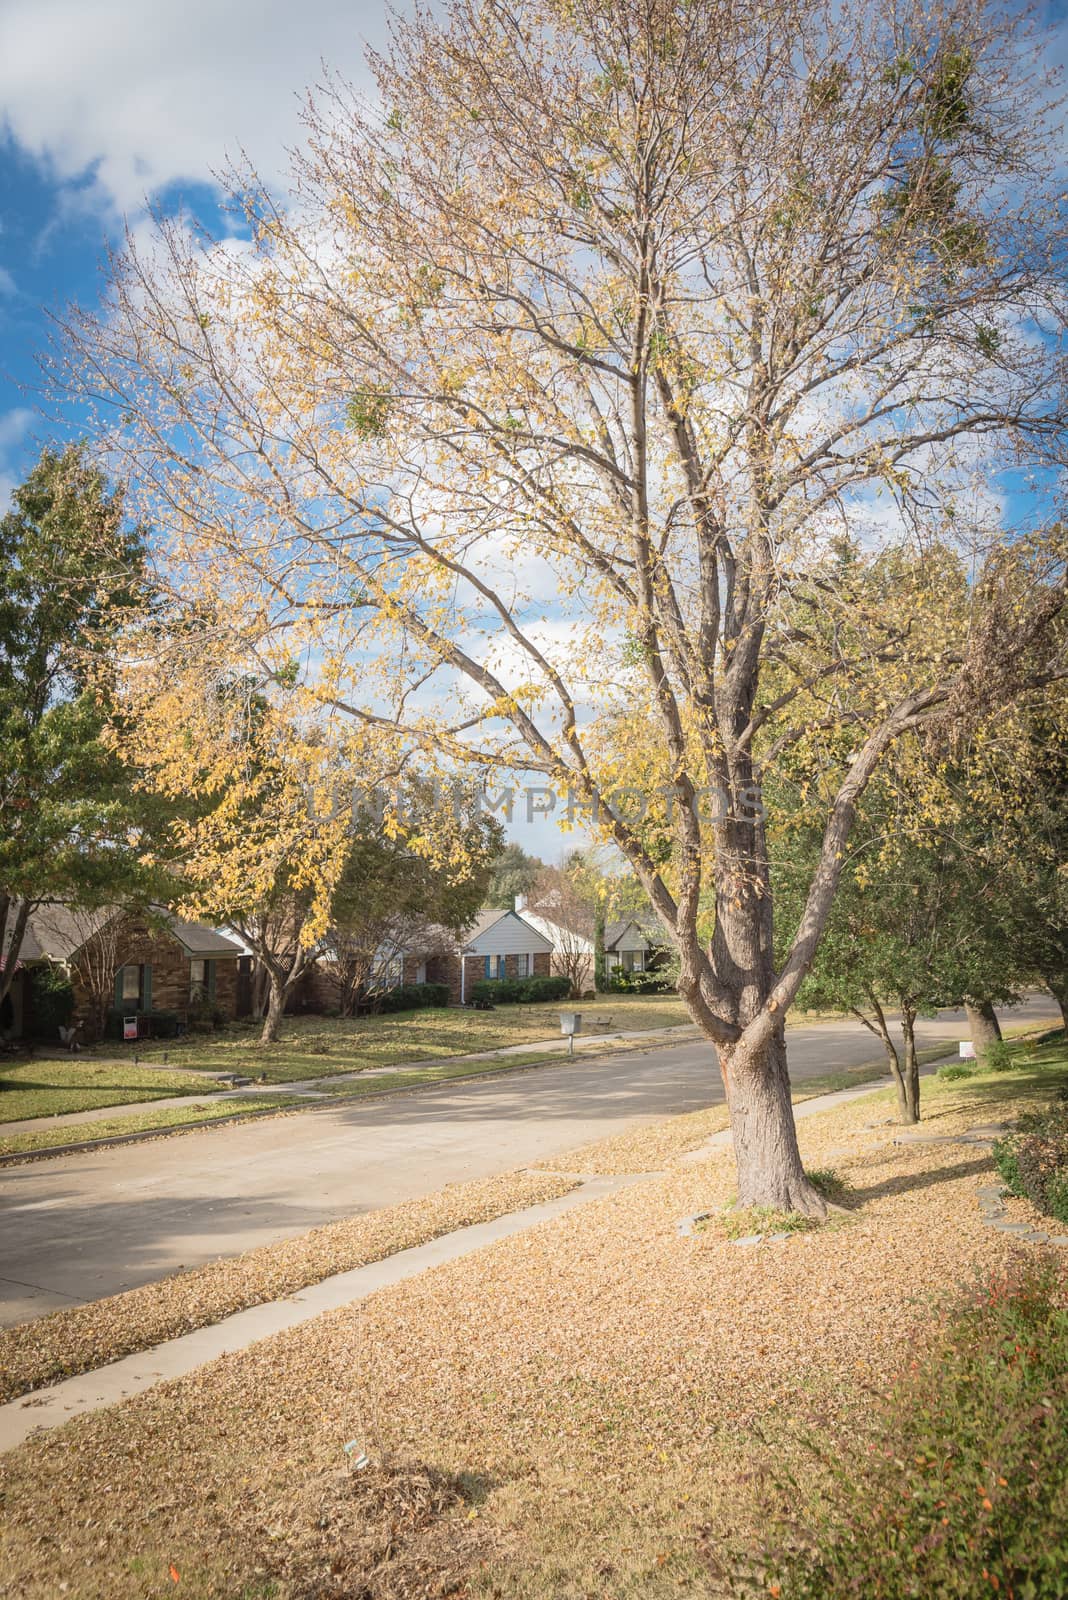 Front yard of residential house in suburbs of Dallas with almost bare maple yellow fall leaves by trongnguyen